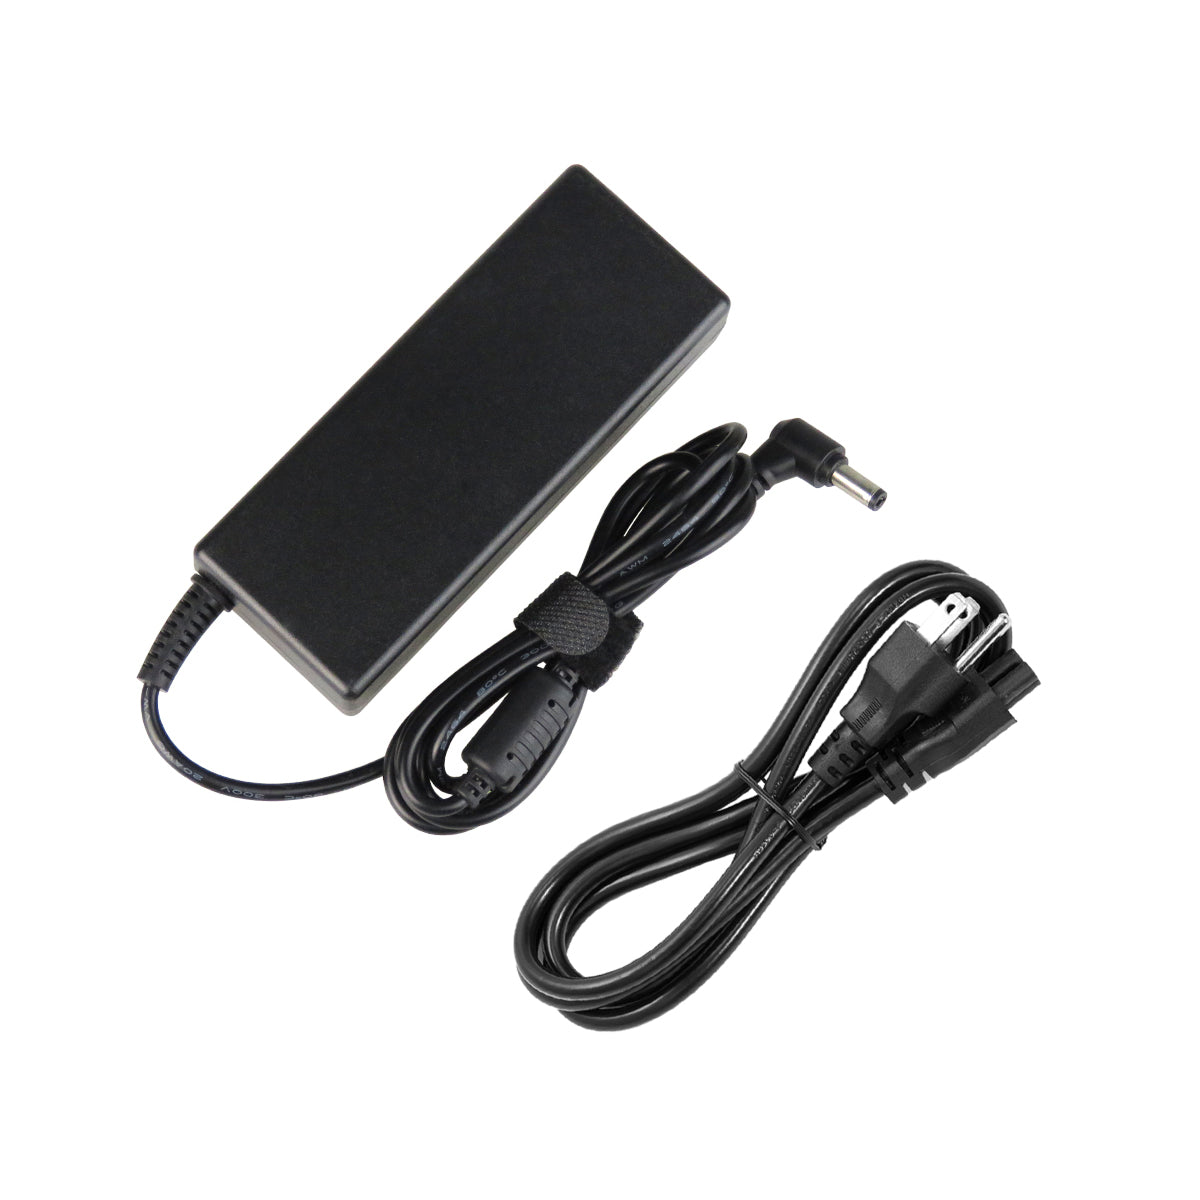 AC Adapter Charger for ASUS K55VJ Laptop.